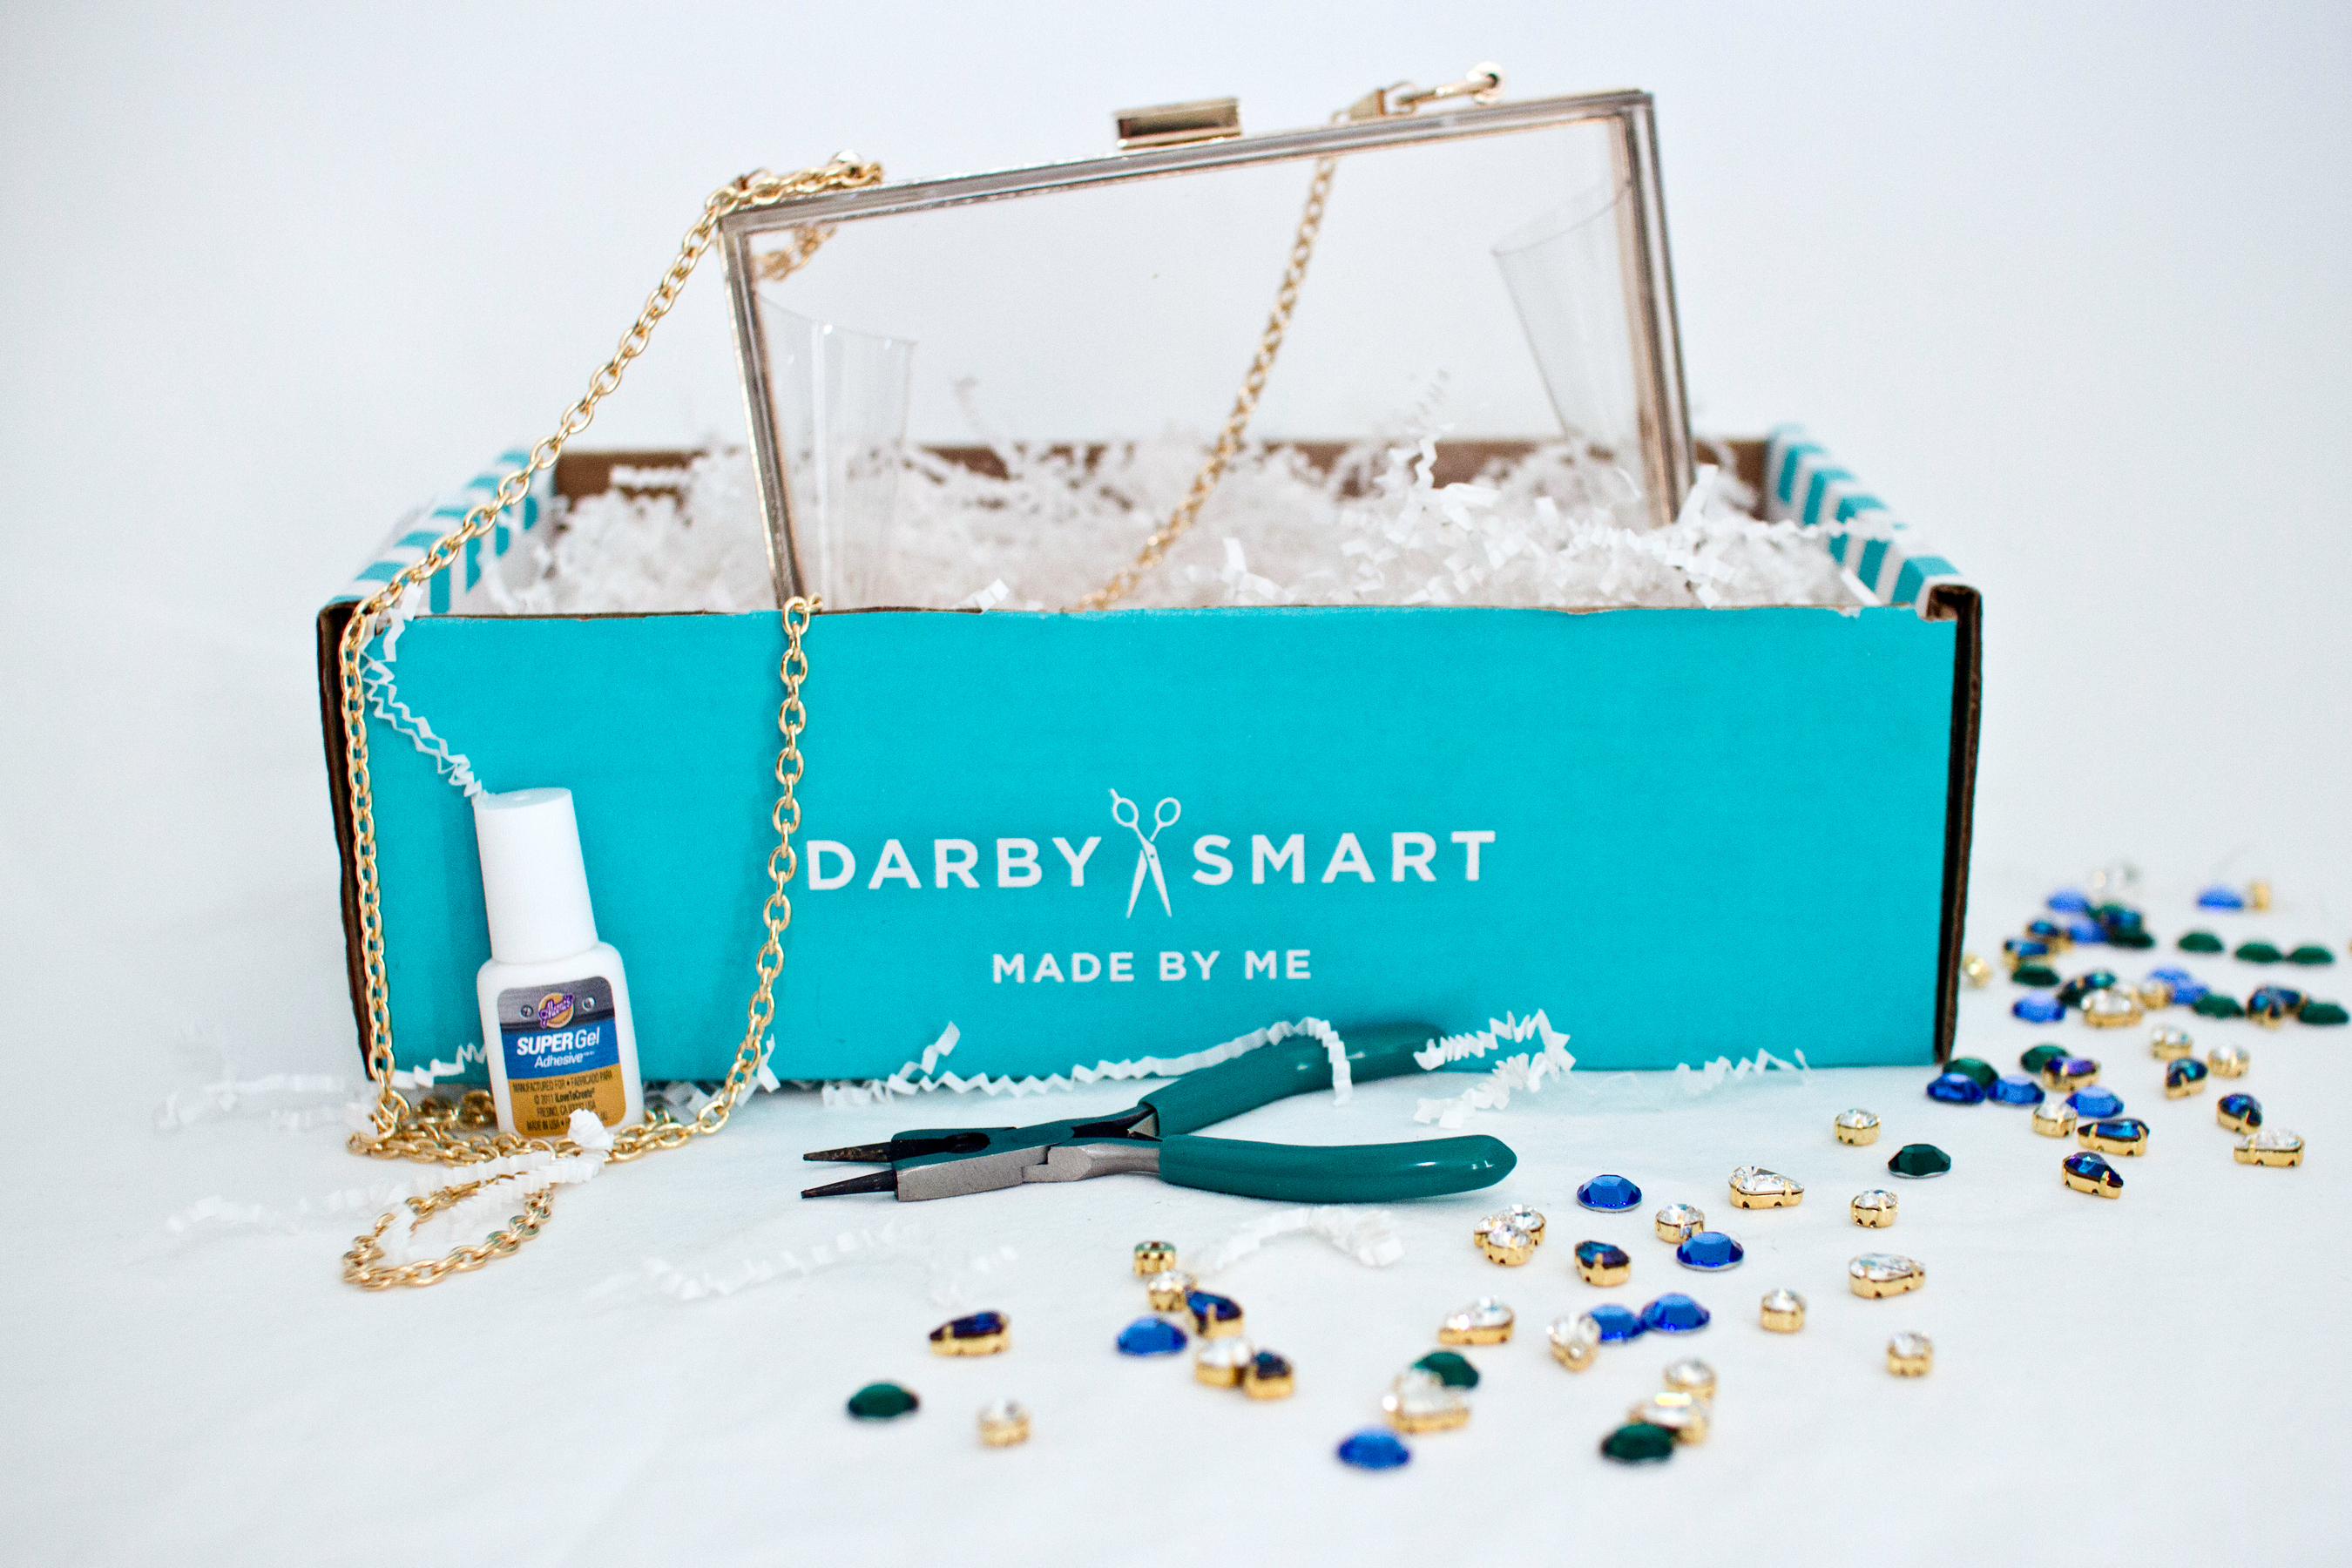 Need a DIY Project?  Darby Smart sends you chic materials and simple instructions, and you get to create stylish DIY projects based on the latest design trends.  Go to http://www.darbysmart.com. (PRNewsFoto/Darby Smart)